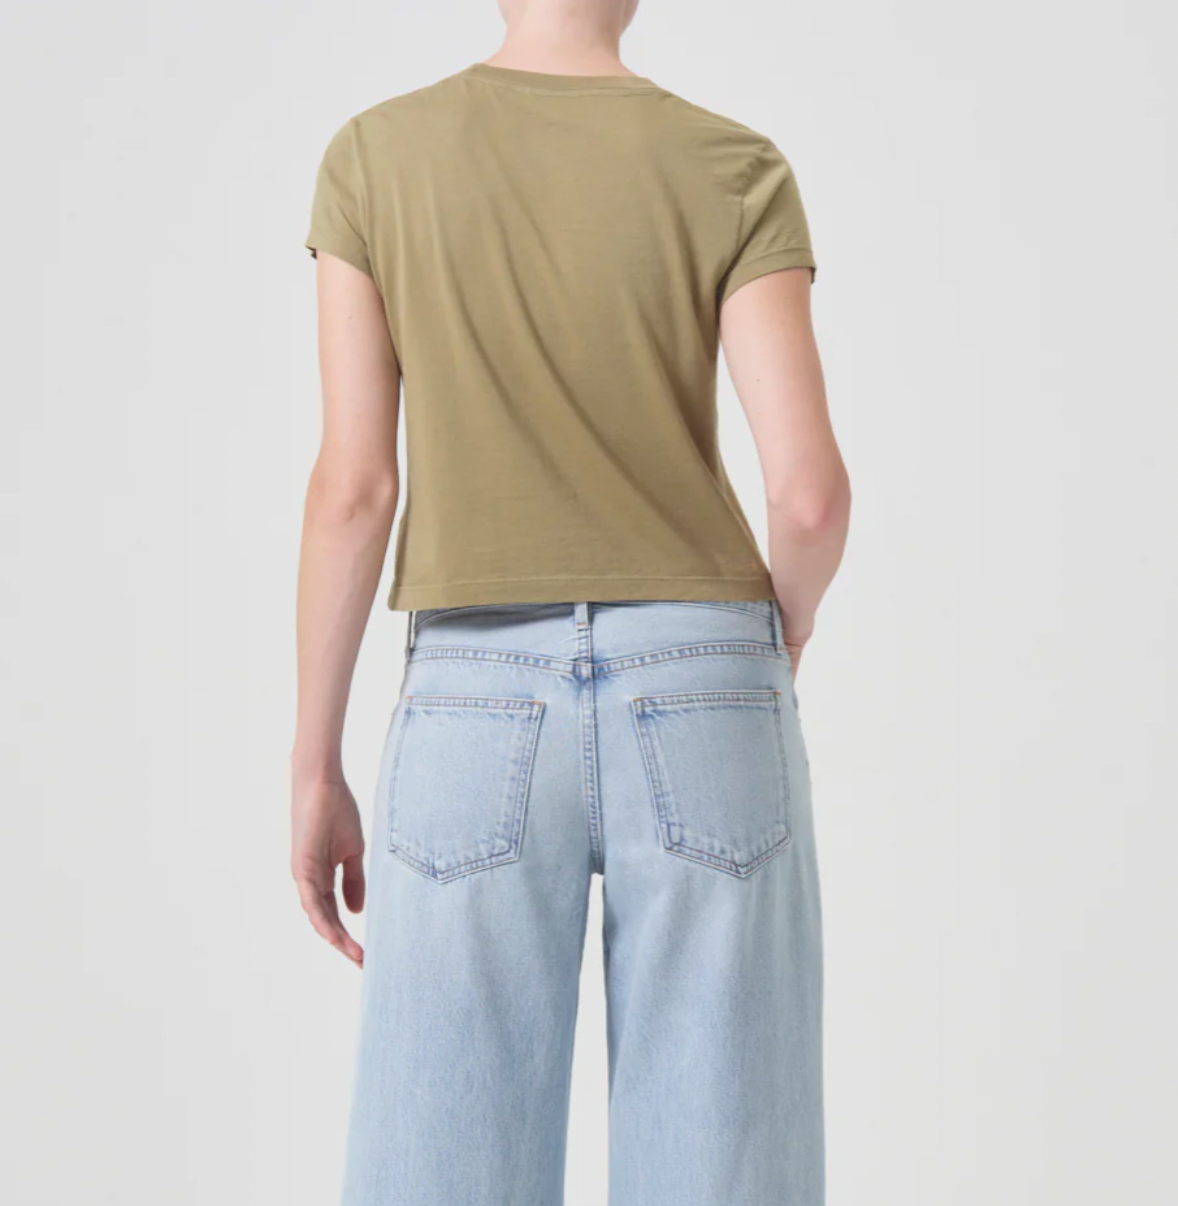 Product Image for Adine Shrunken Tee, Cocoon